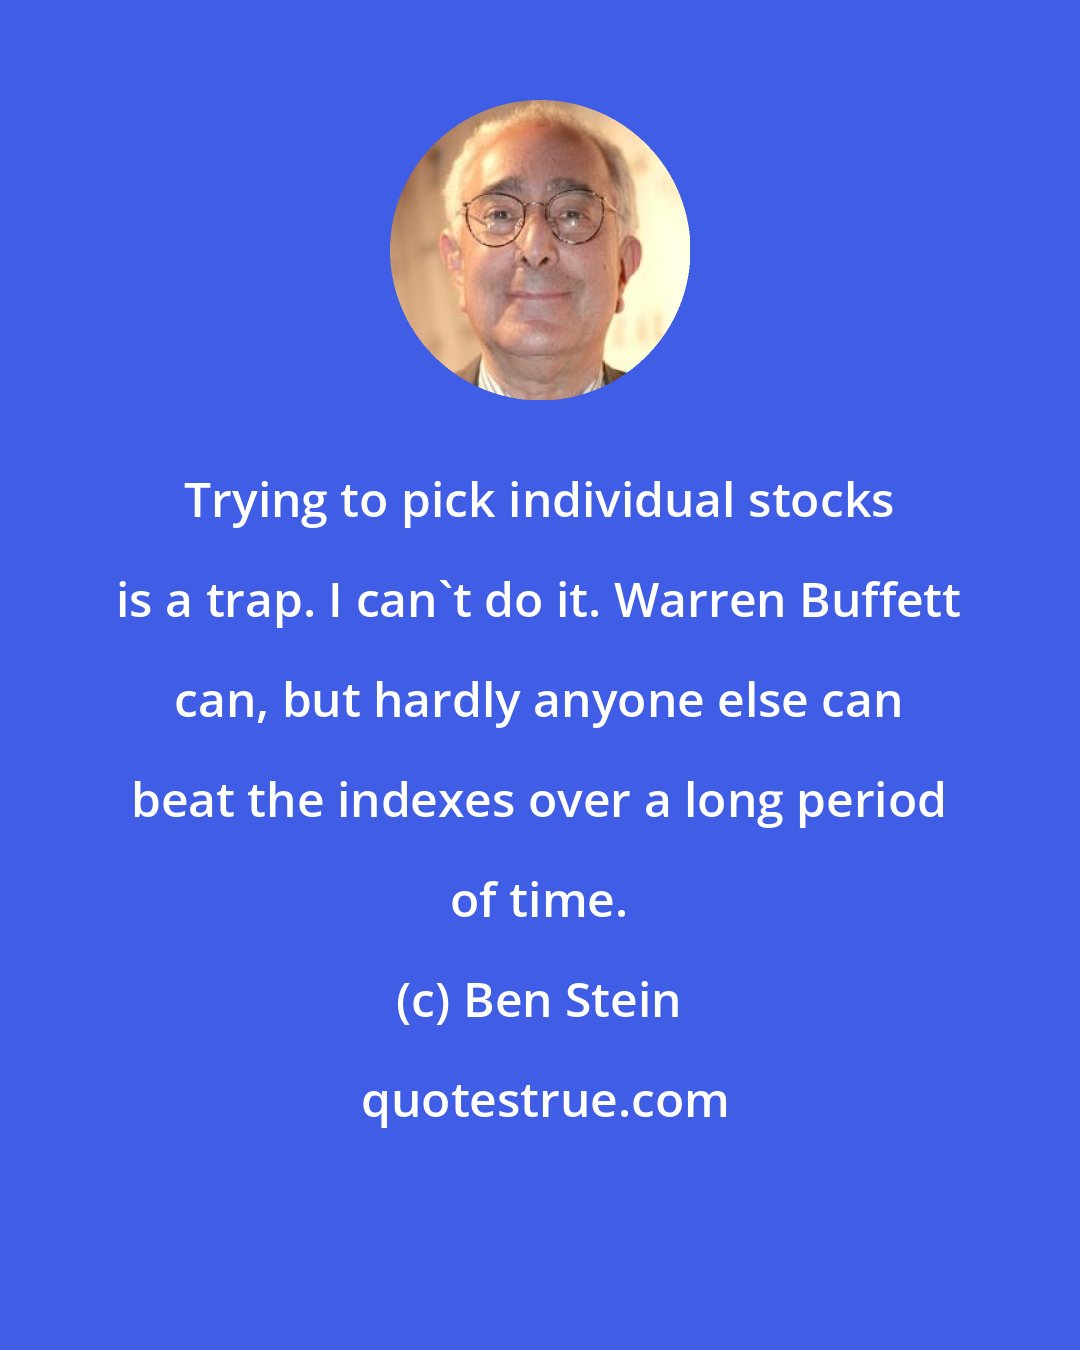 Ben Stein: Trying to pick individual stocks is a trap. I can't do it. Warren Buffett can, but hardly anyone else can beat the indexes over a long period of time.